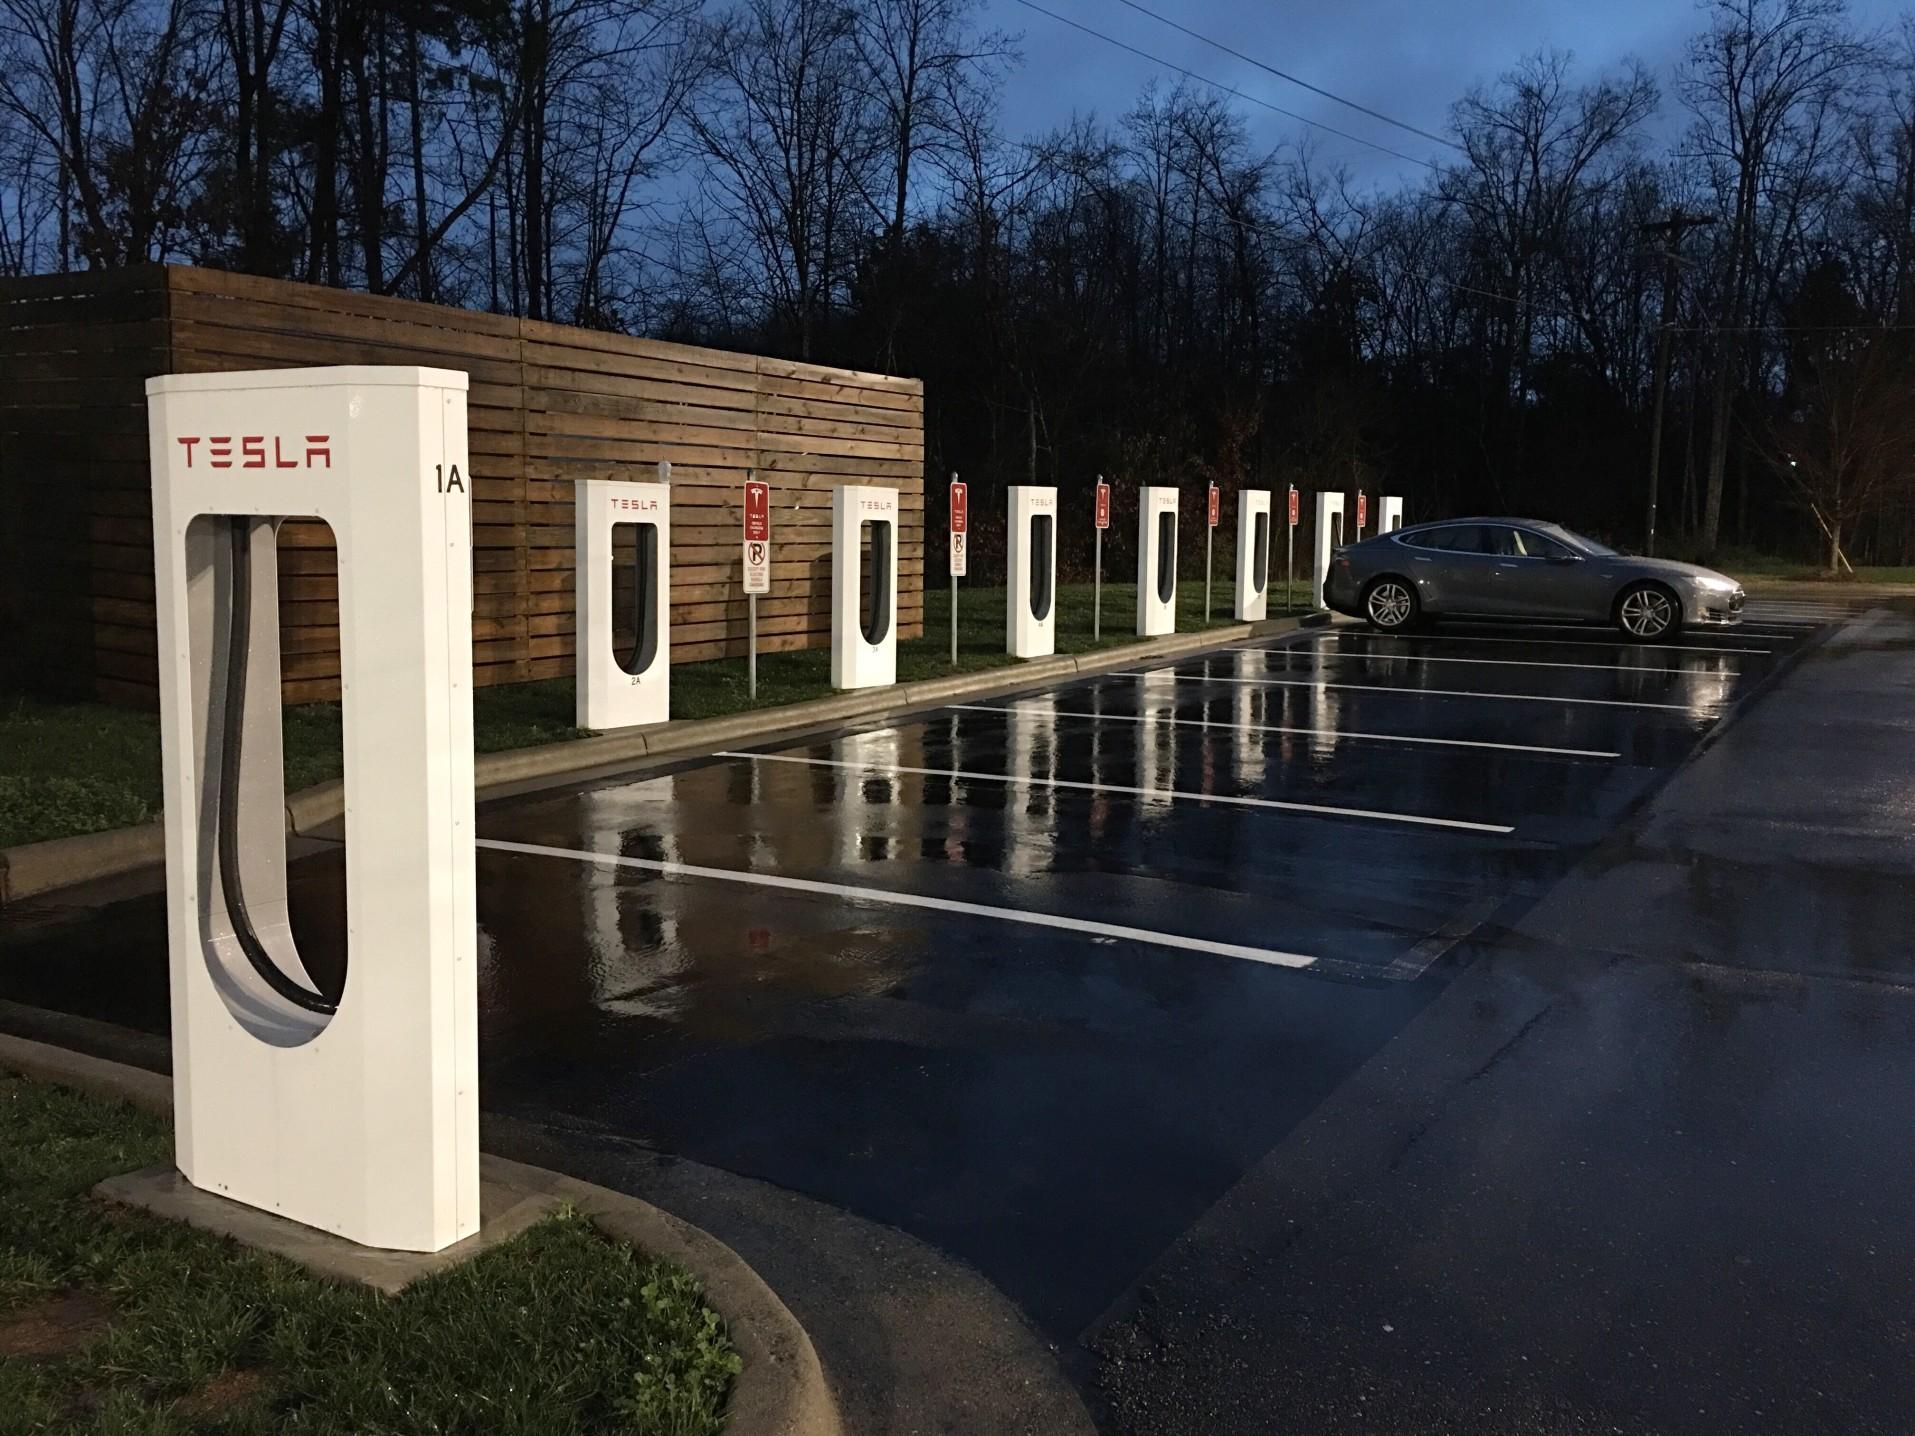 The lack of charging stations is a major pain point for potential EV customers.